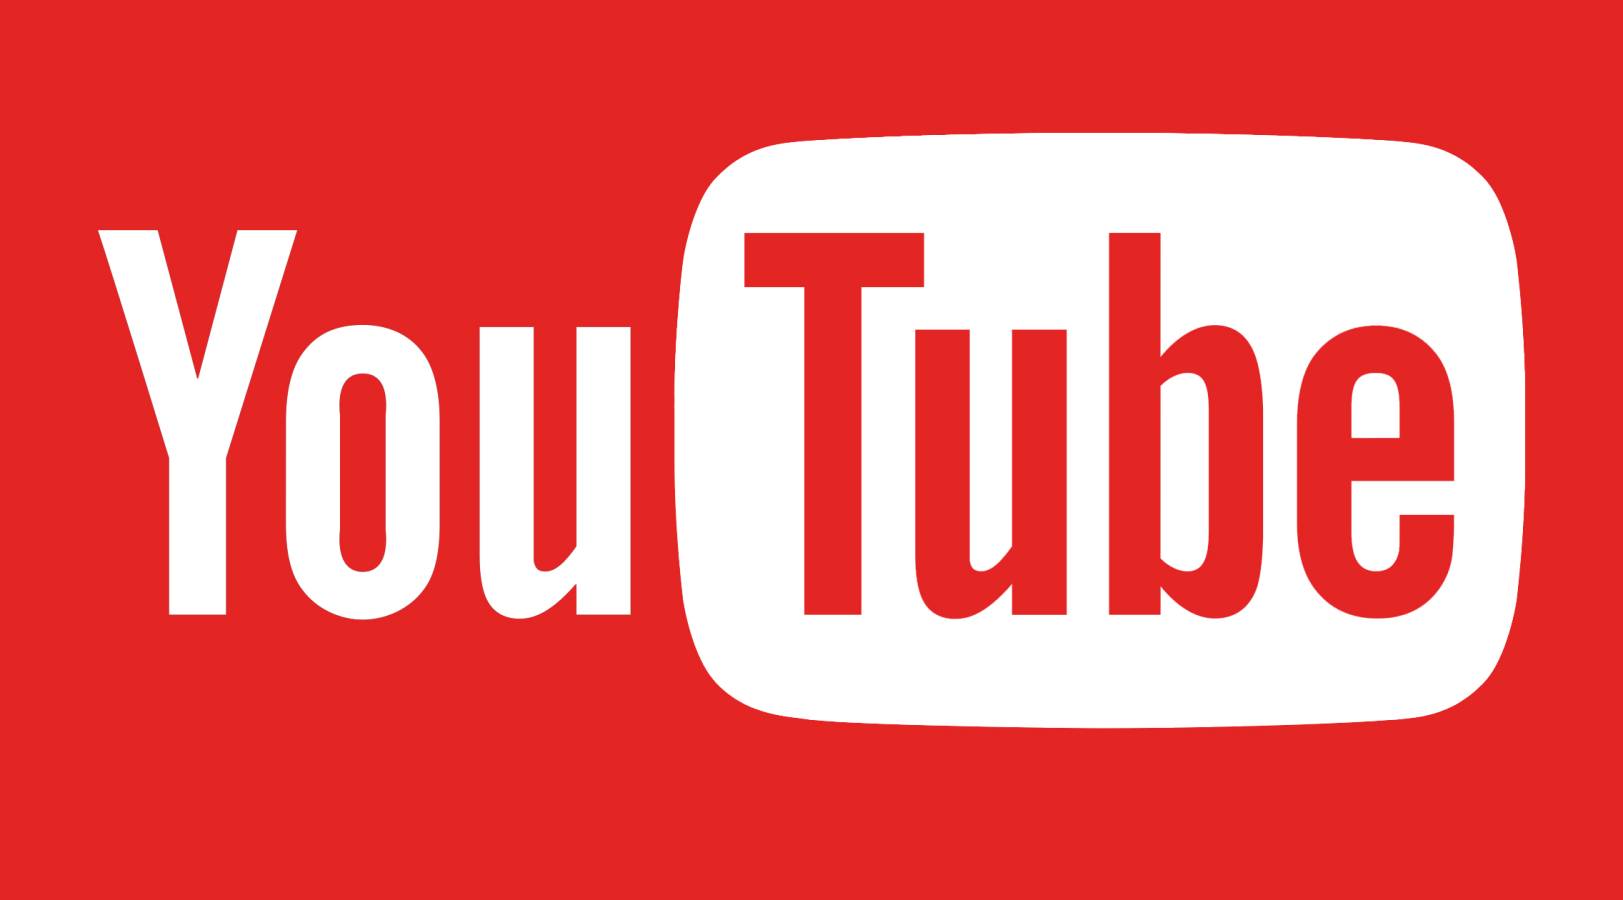 YouTube Application for iPhone and Android Updated with News for People